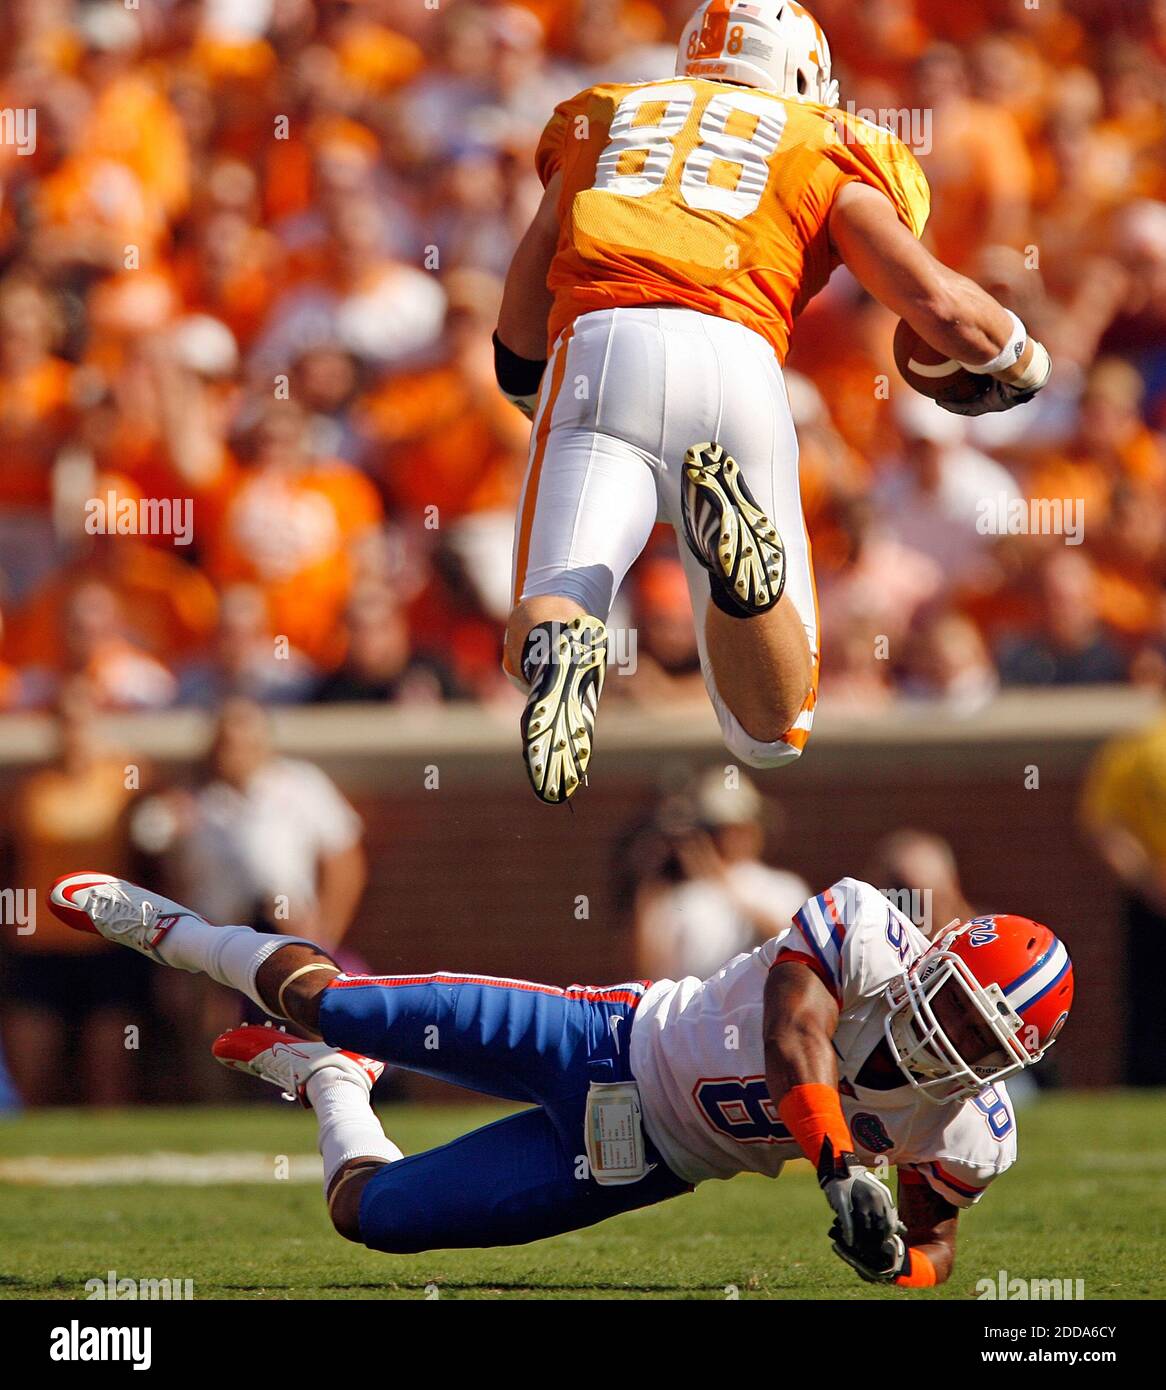 NO FILM, NO VIDEO, NO TV, NO DOCUMENTARY - Tennessee tight end Luke Stocker (88) jumps over Florida cornerback Jeremy Brown (8) during NCAA Football match, Tennessee Volunteers vs Florida Gators at Neyland Stadium in Knoxville, USA on September 18, 2010. The Gators won 31-17. Photo by Gary W. Green/MCT/Cameleon/ABACAPRESS.COM Stock Photo